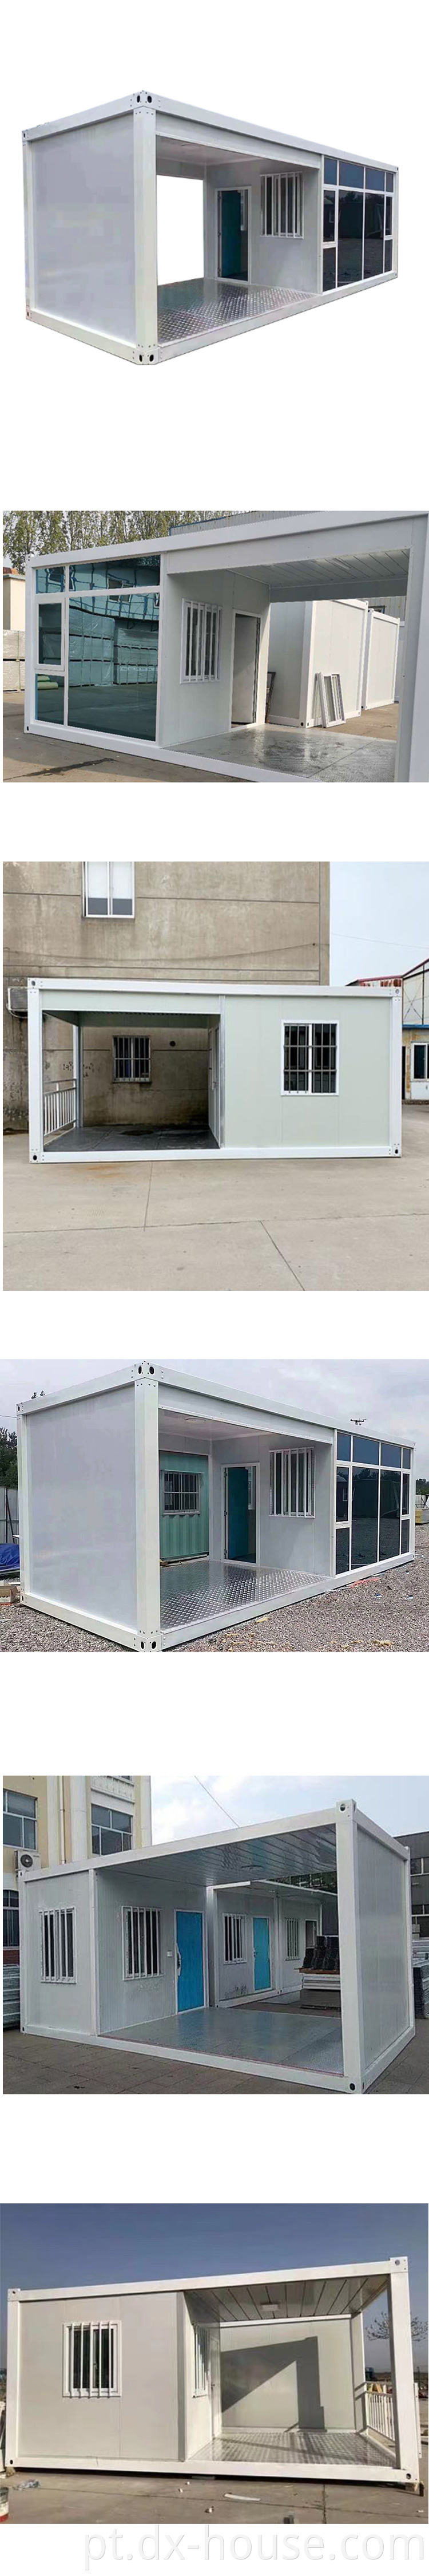 simple container house